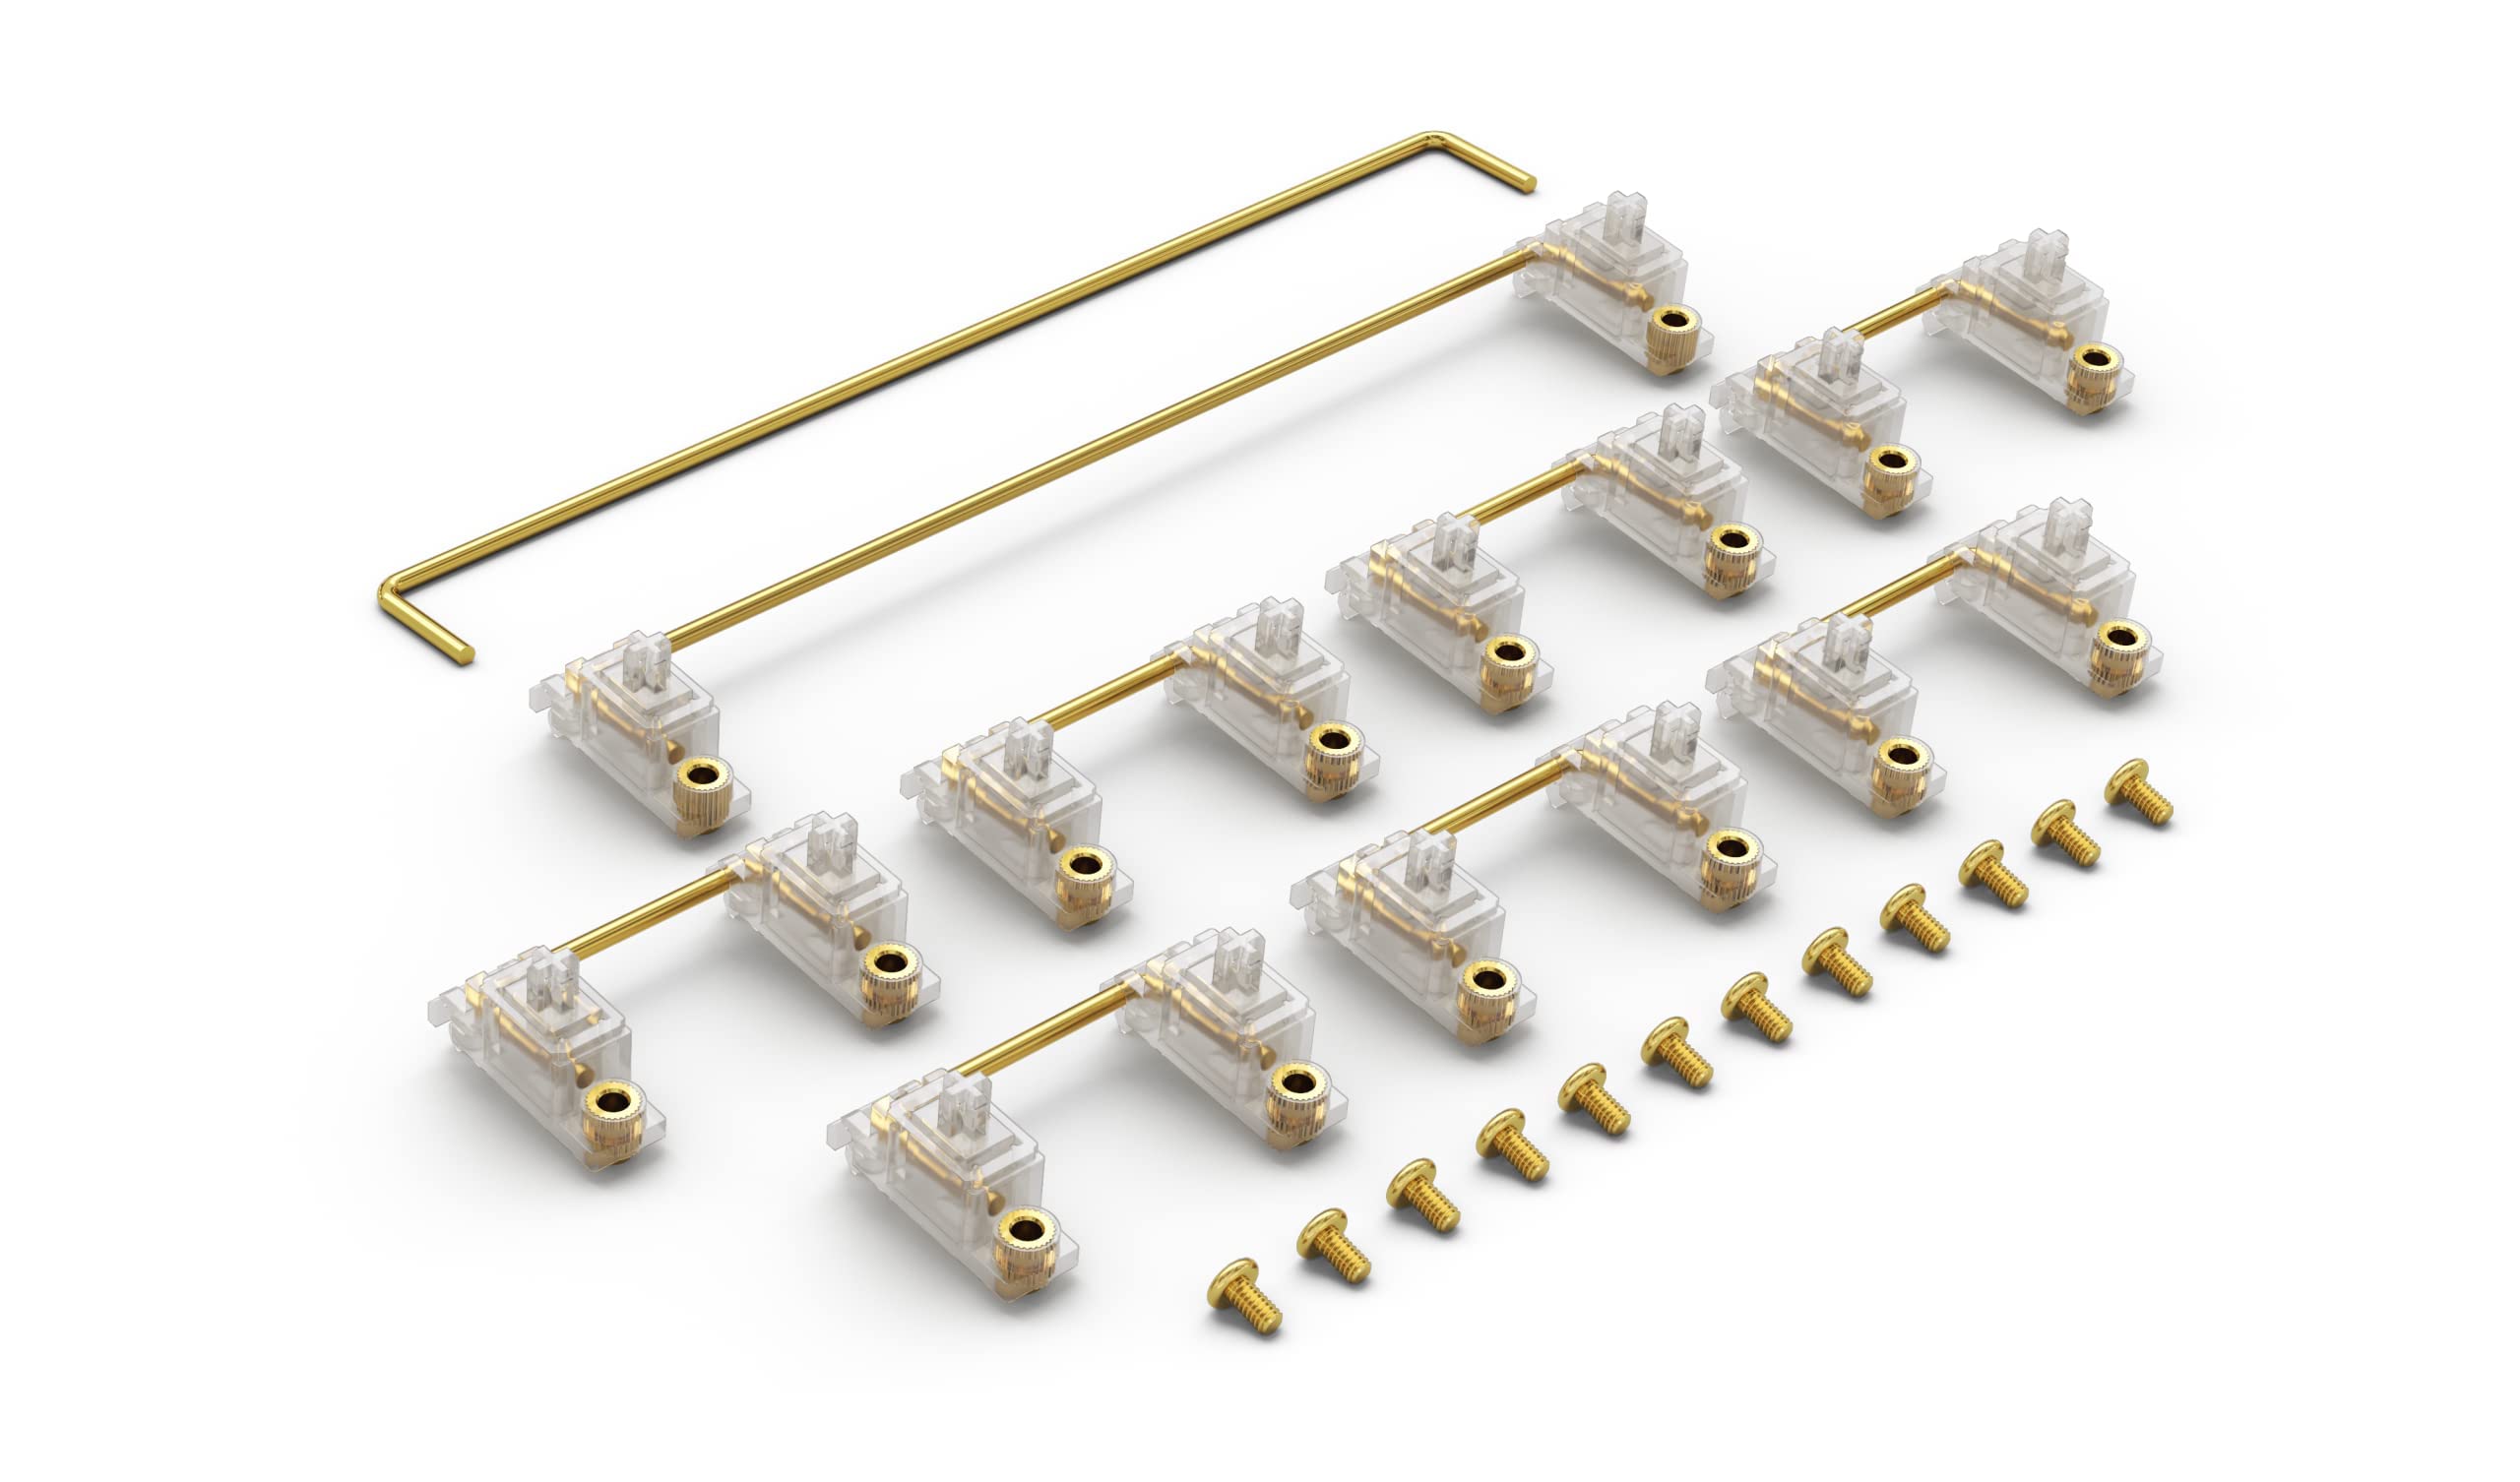 GLORIOUS Keyboard Stabilizer GSV2 Kit for Mechanical Keyboards, Gold Wire and Premium Polymer, MX Compatible, Easy Screw-in, PCB Mount, Enhanced Sound on GMMK 2, PRO & Numpad (2u, 6.25u, and 7u)